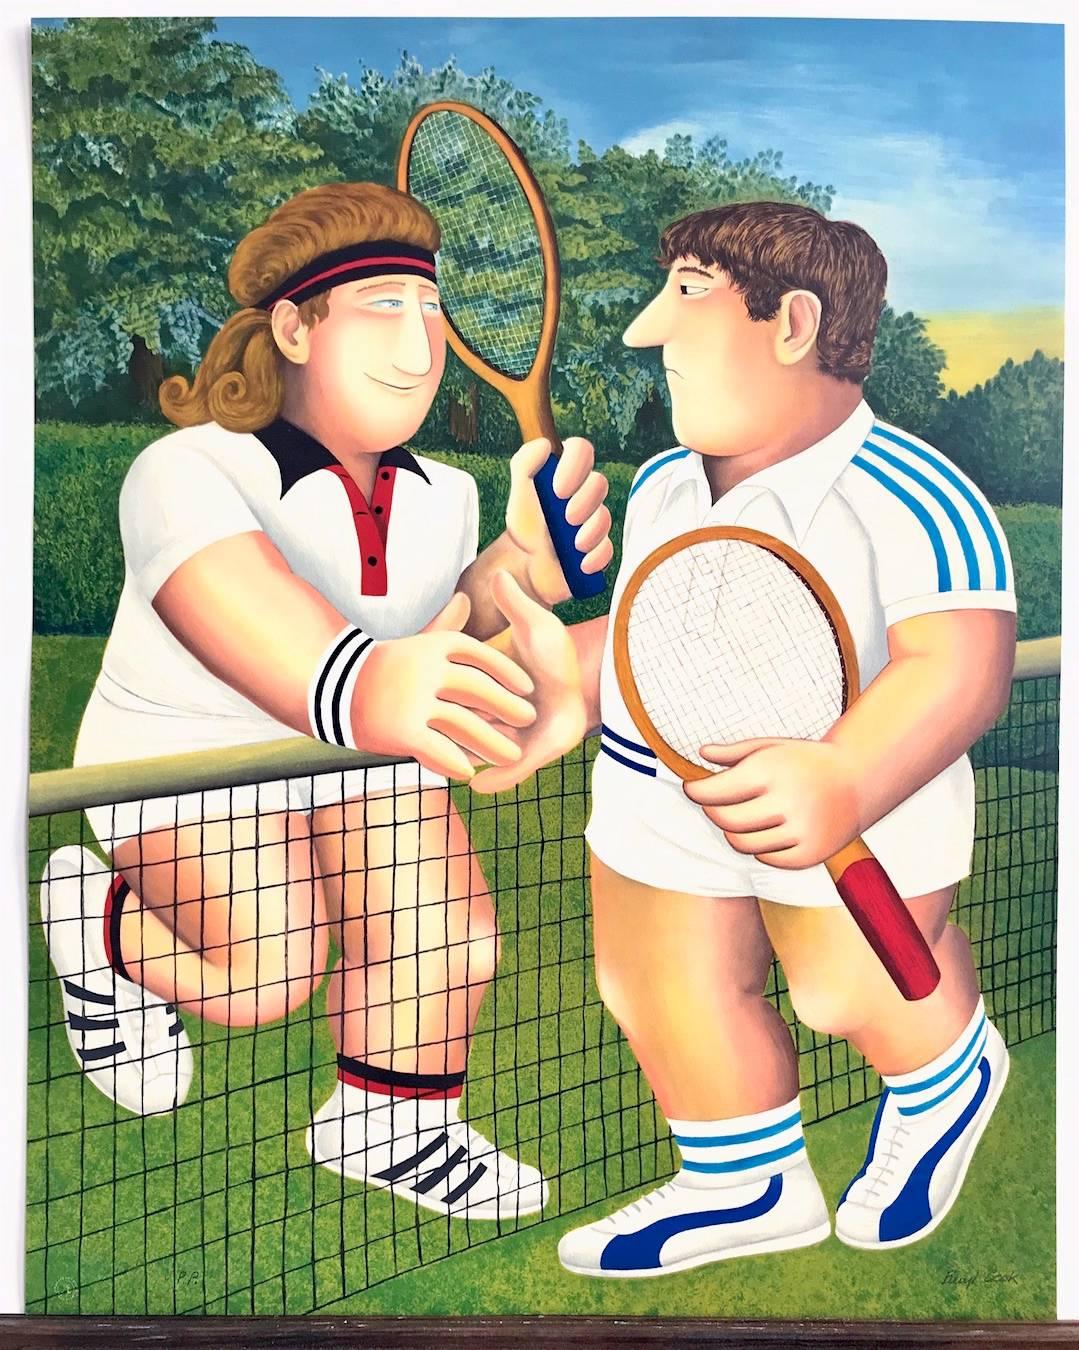 TENNIS Hand Drawn Signed Lithograph, Borg vs. Connors Rivalry, British Humor - Brown Figurative Print by Beryl Cook